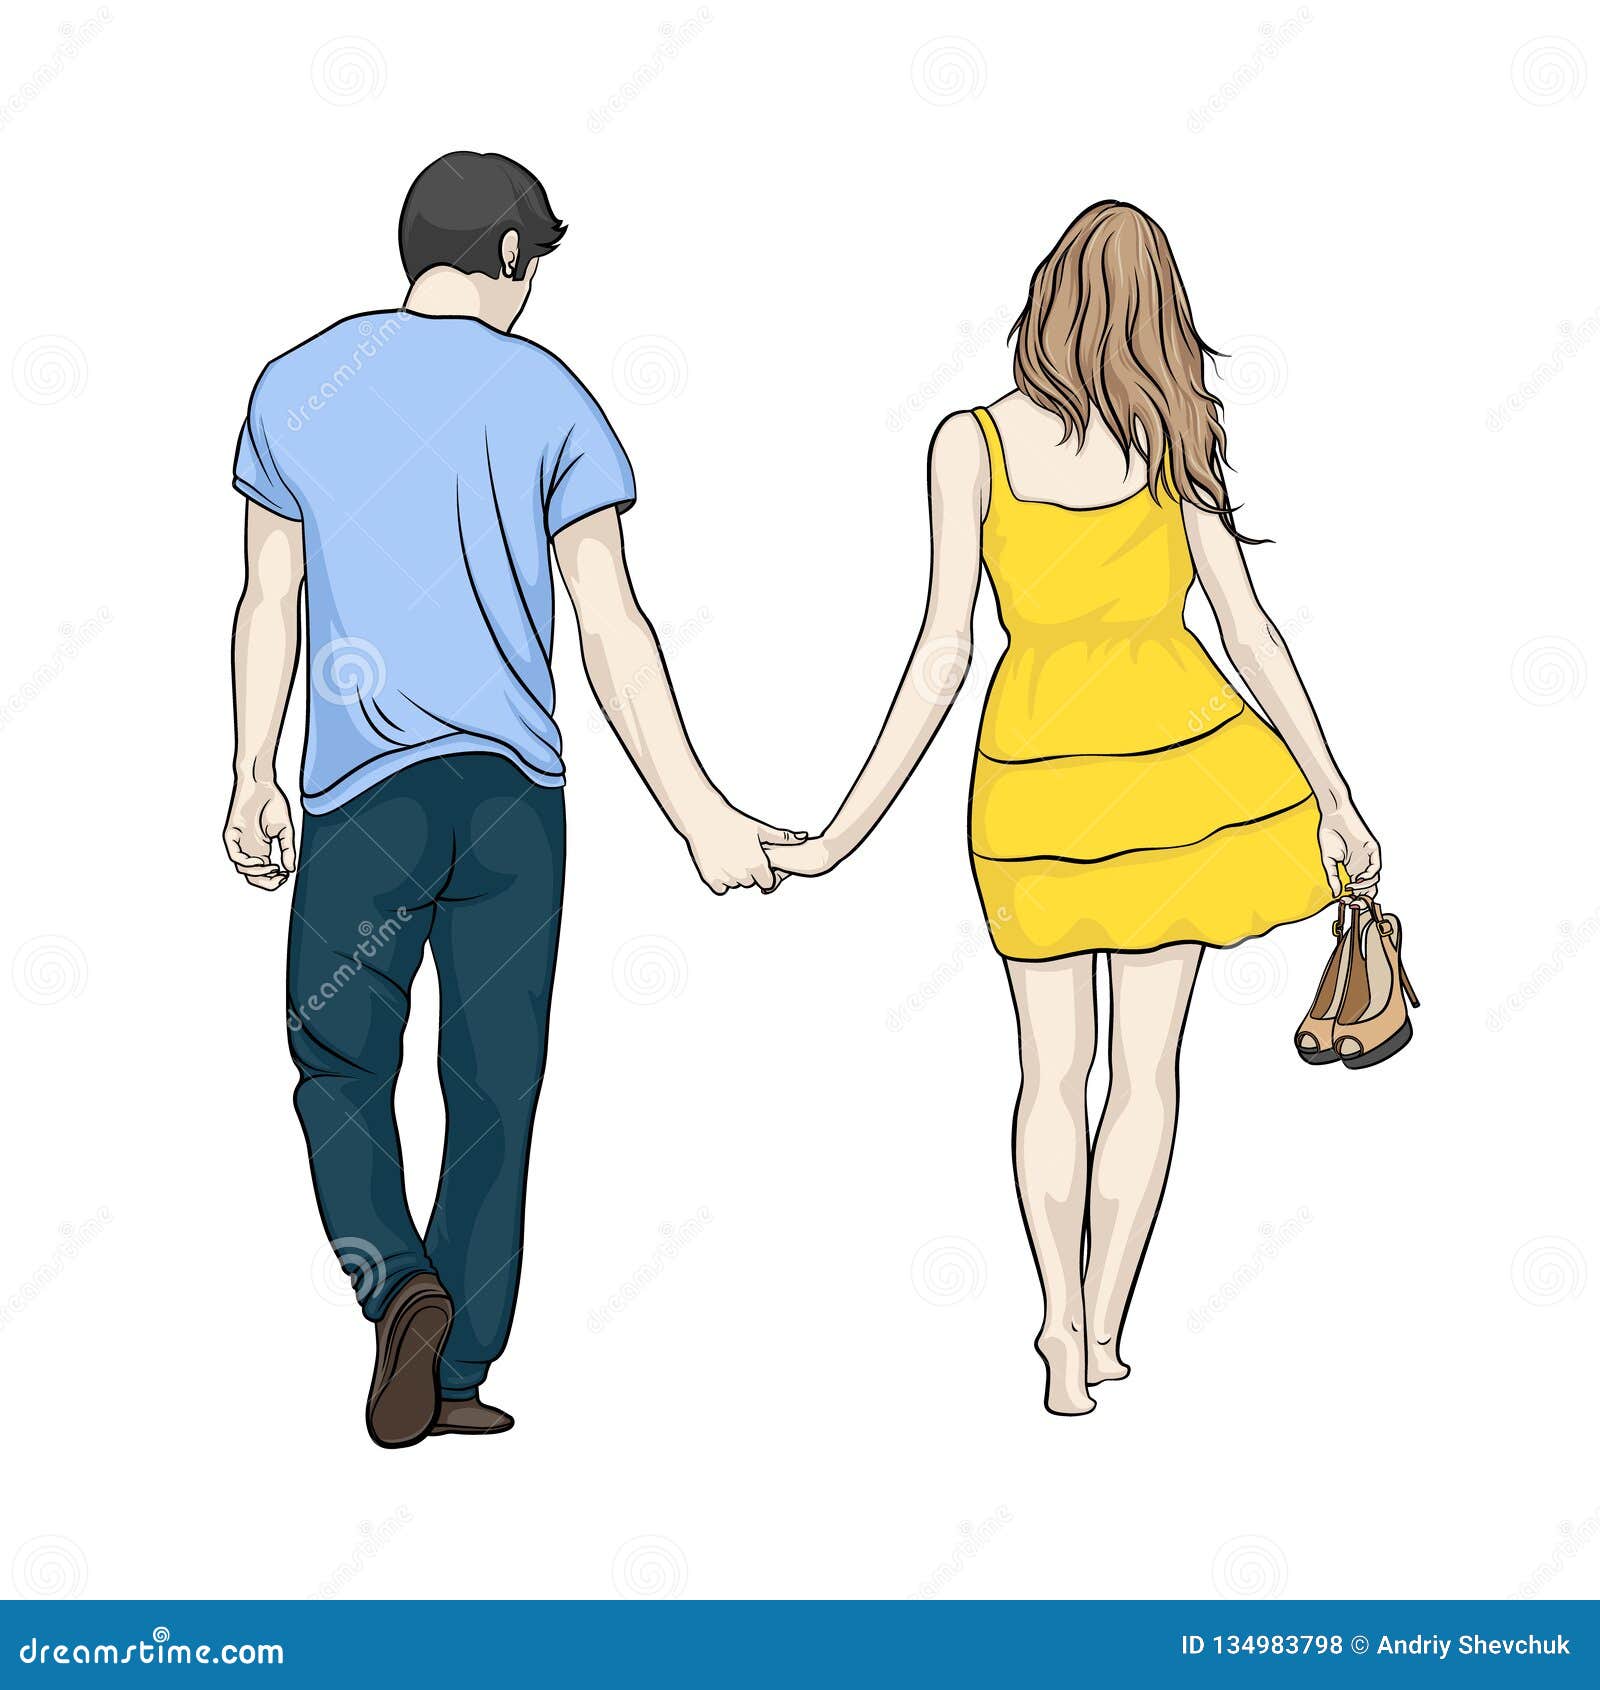 Boy Girl Holding Hands Sea Stock Illustrations 57 Boy Girl Holding Hands Sea Stock Illustrations Vectors Clipart Dreamstime